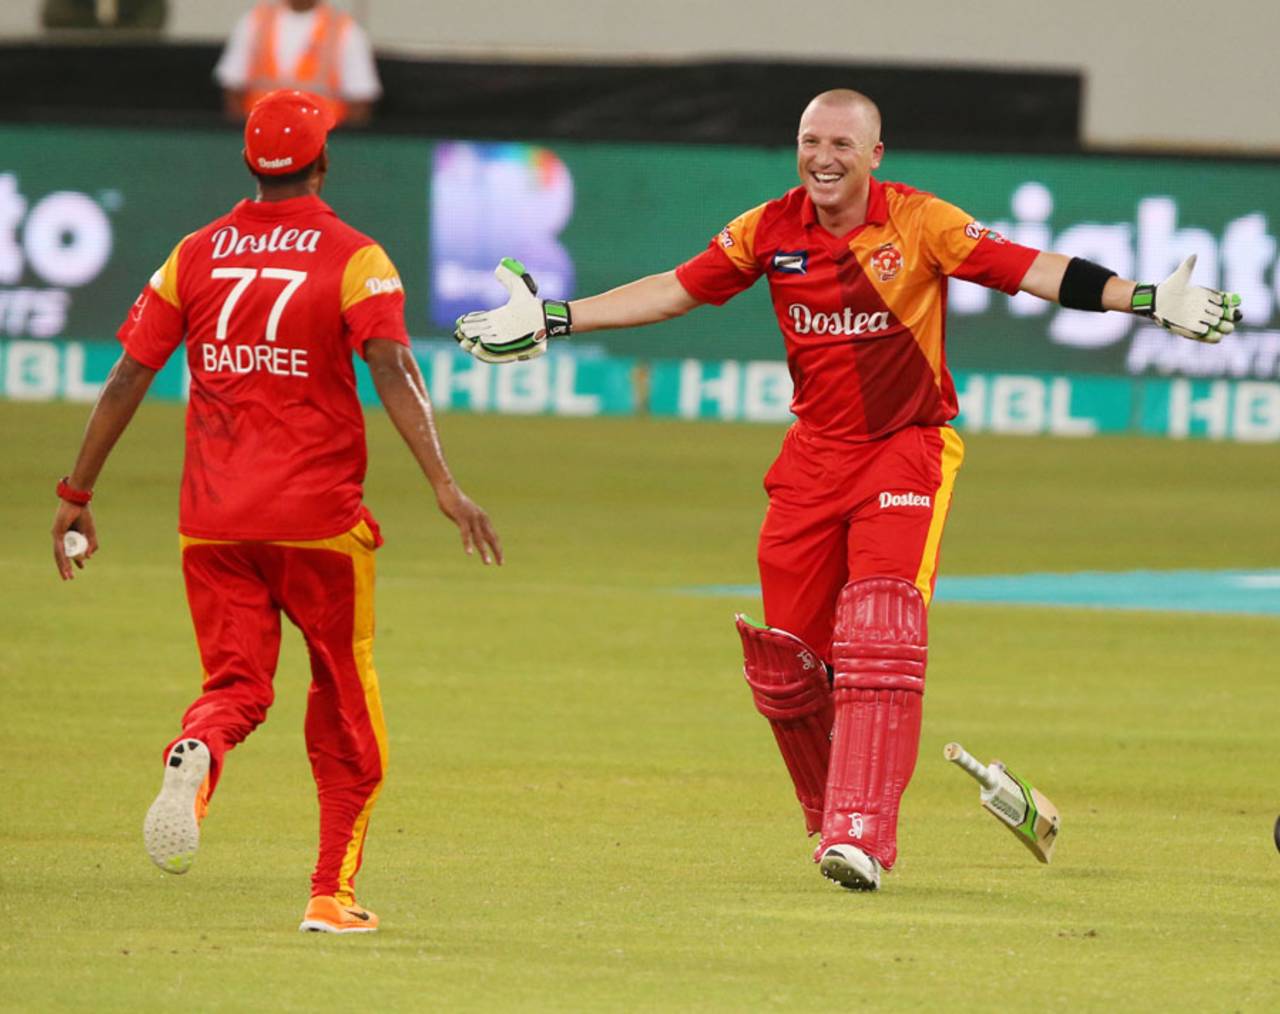 Show Brad some love: Haddin's ease against pace and spin reduced the pressure during Islamabad United's chase&nbsp;&nbsp;&bull;&nbsp;&nbsp;Chris Whiteoak